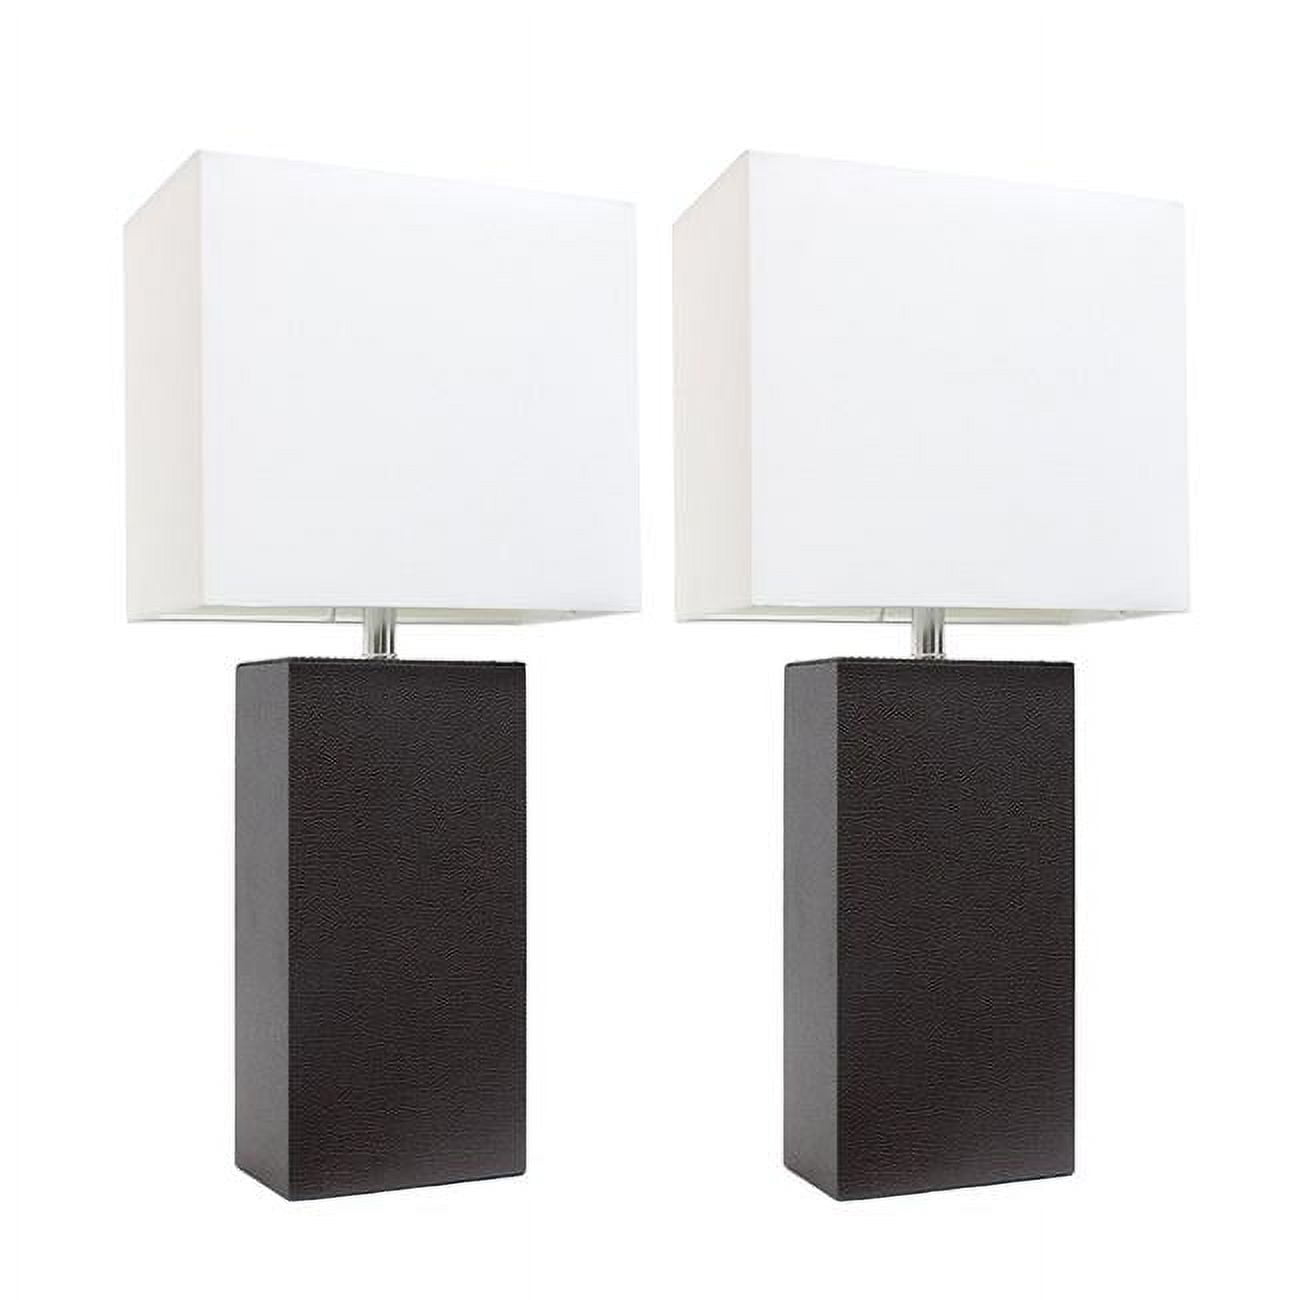 Alltherages Lc2000-bwn-2pk Elegant Designs Modern Leather Table Lamp With White Fabric Shade - Brown, Pack Of 2